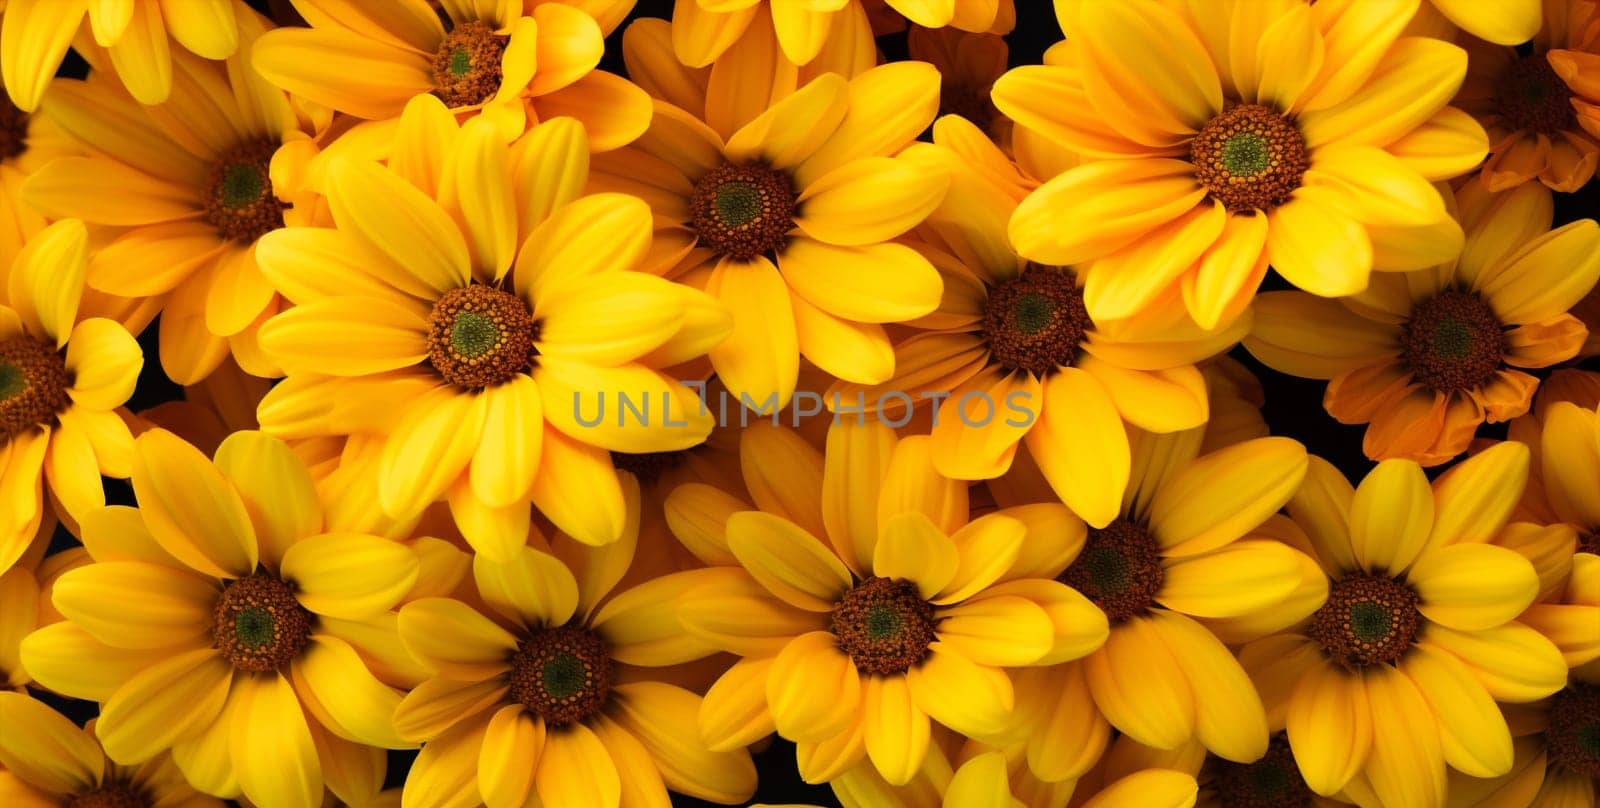 Mockup nature bright floral gardening blossom flower close bloom background beauty chrysanthemum plants summer yellow botany group flora bouquet up